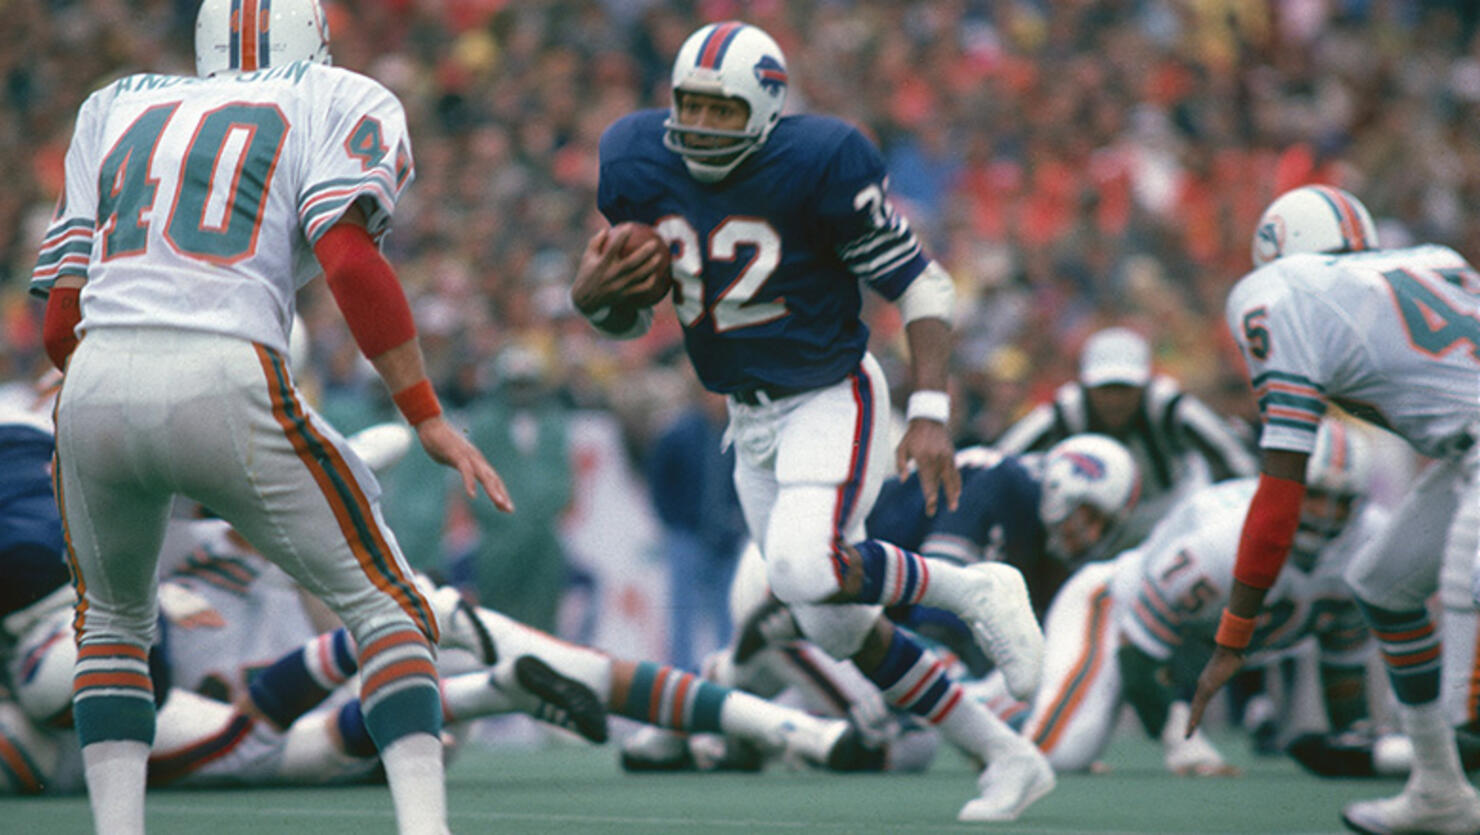 Buffalo Bills player will wear O.J. Simpson's No. 32 for first